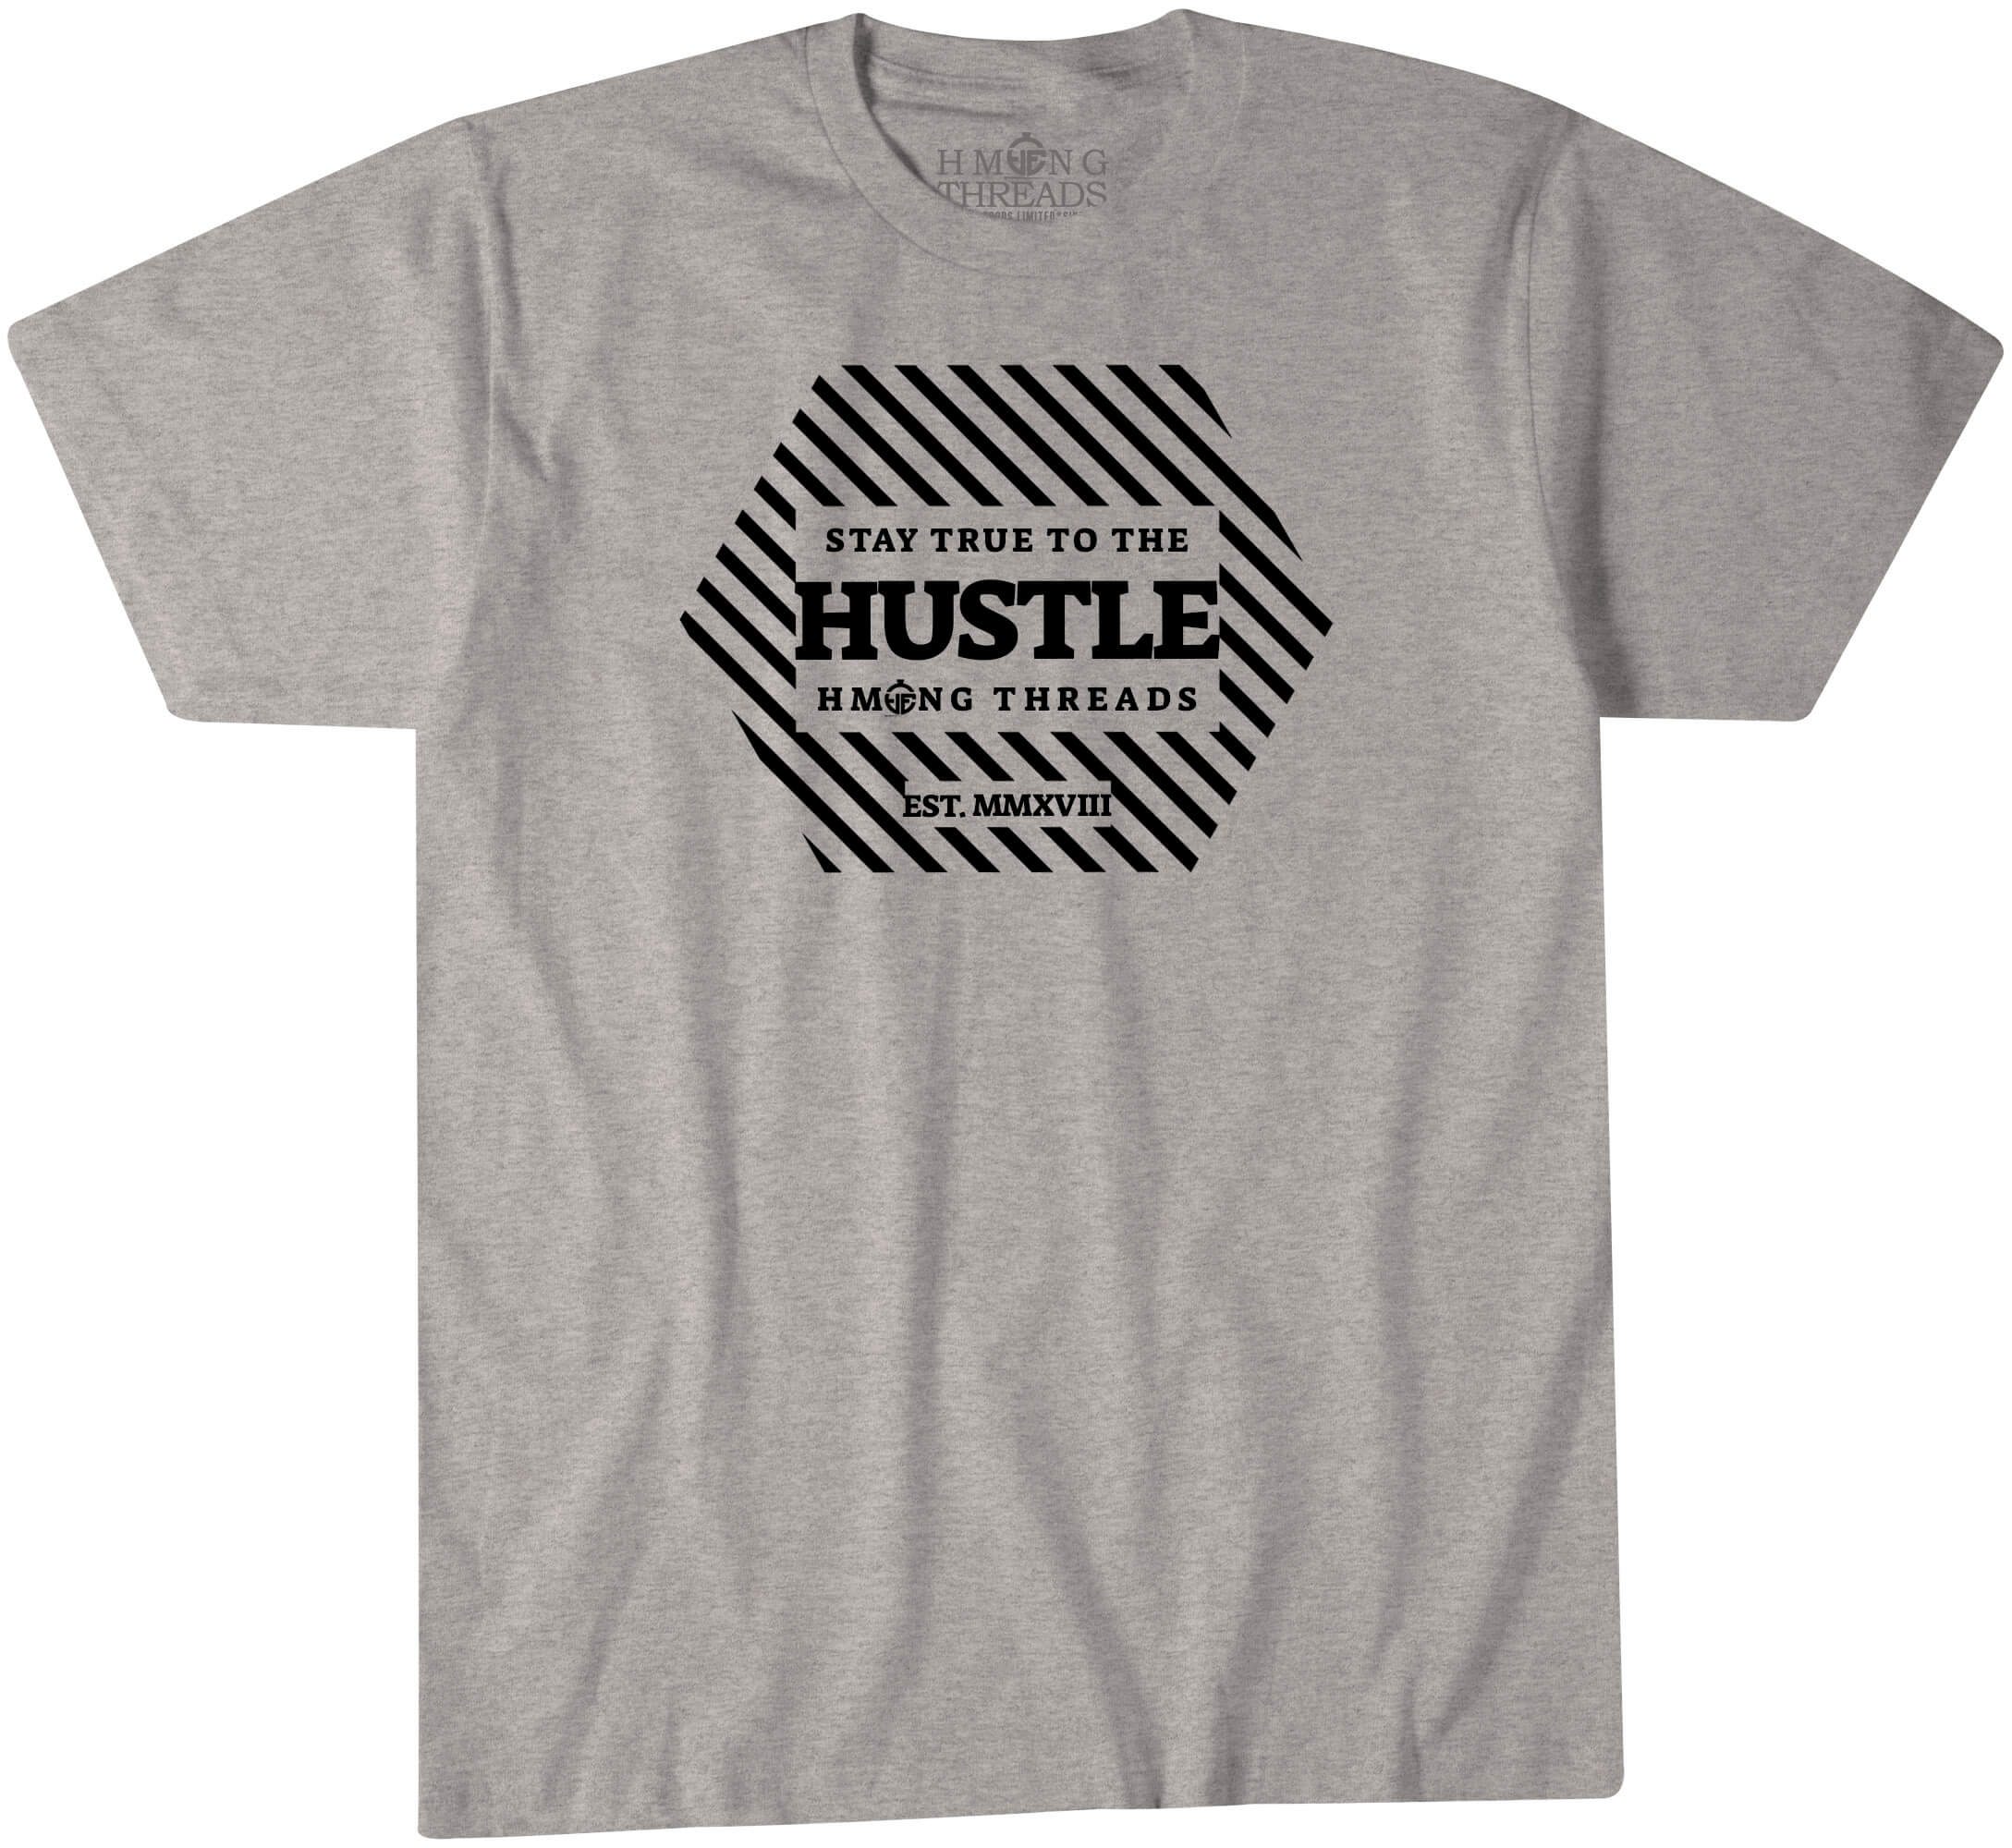 Stay True to the Hustle Heather Grey Color T-Shirt - HMONG THREADS